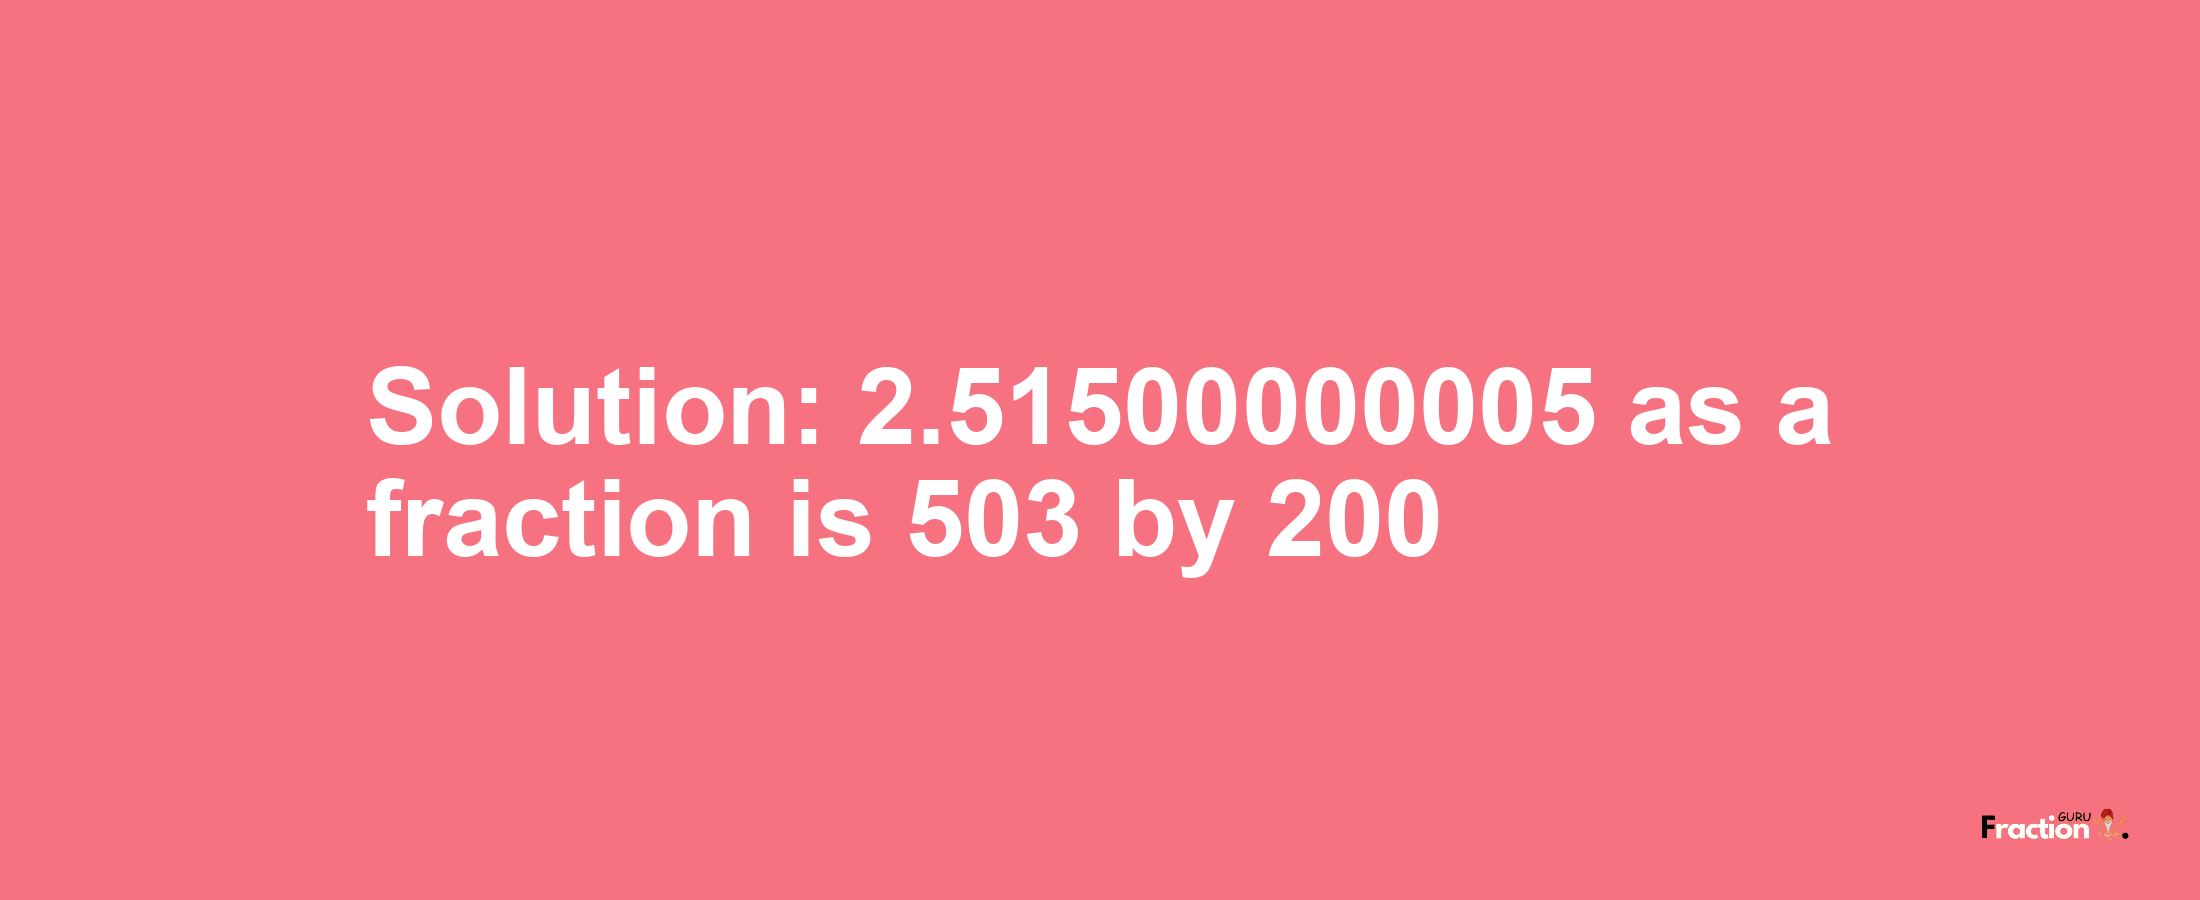 Solution:2.51500000005 as a fraction is 503/200